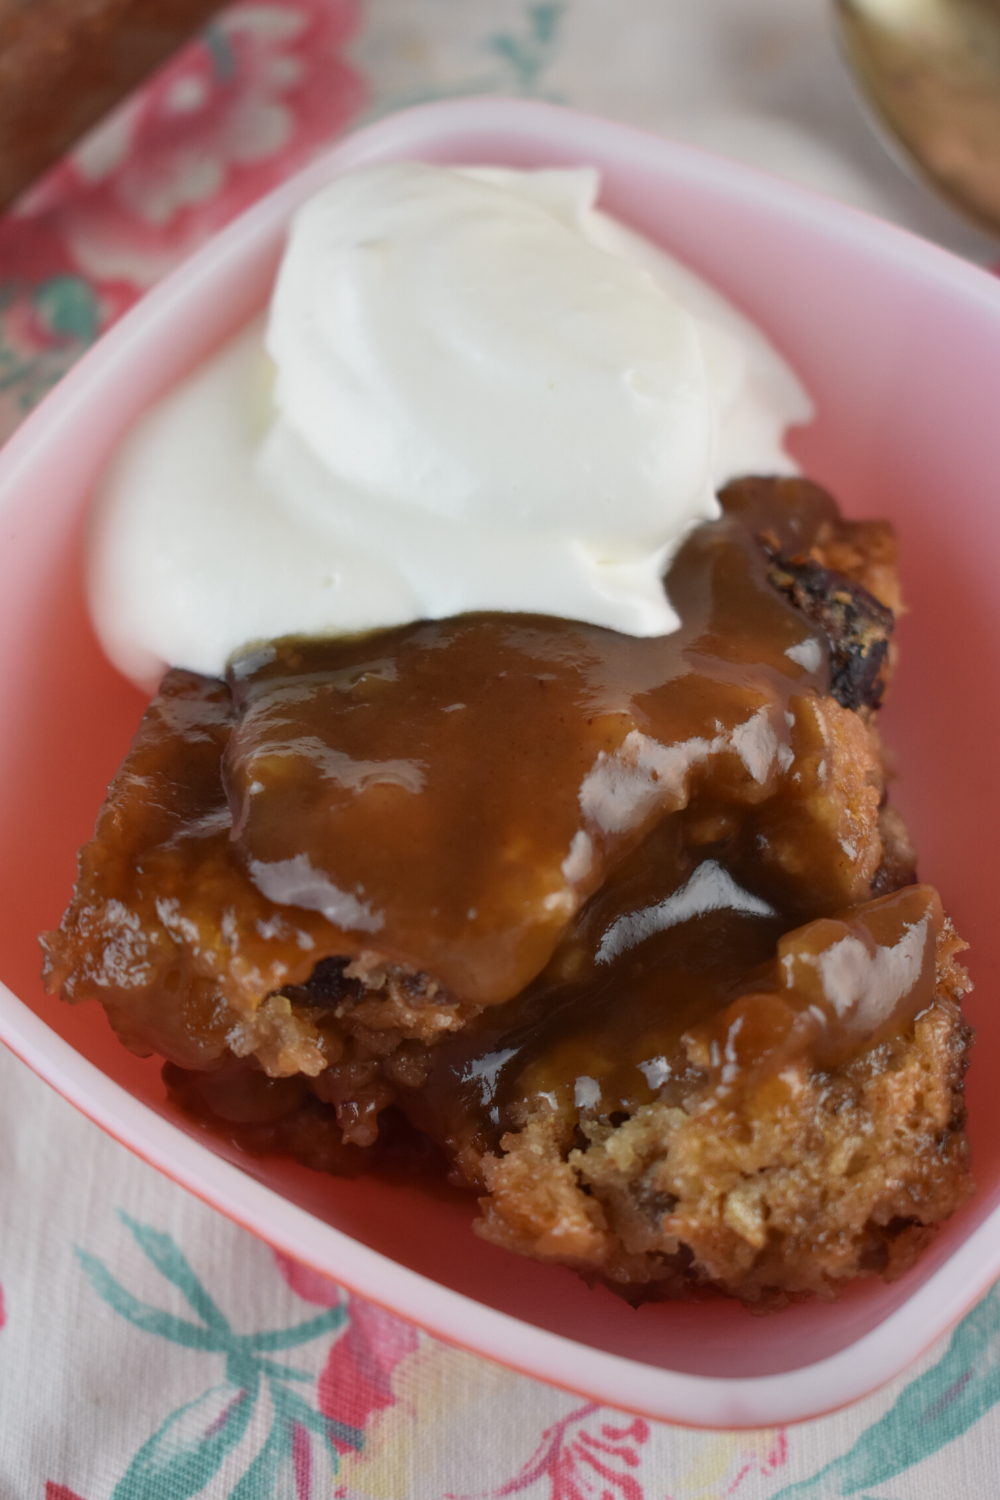 Old Fashioned Date Pudding – Sticky Date Pudding with Caramel Sauce